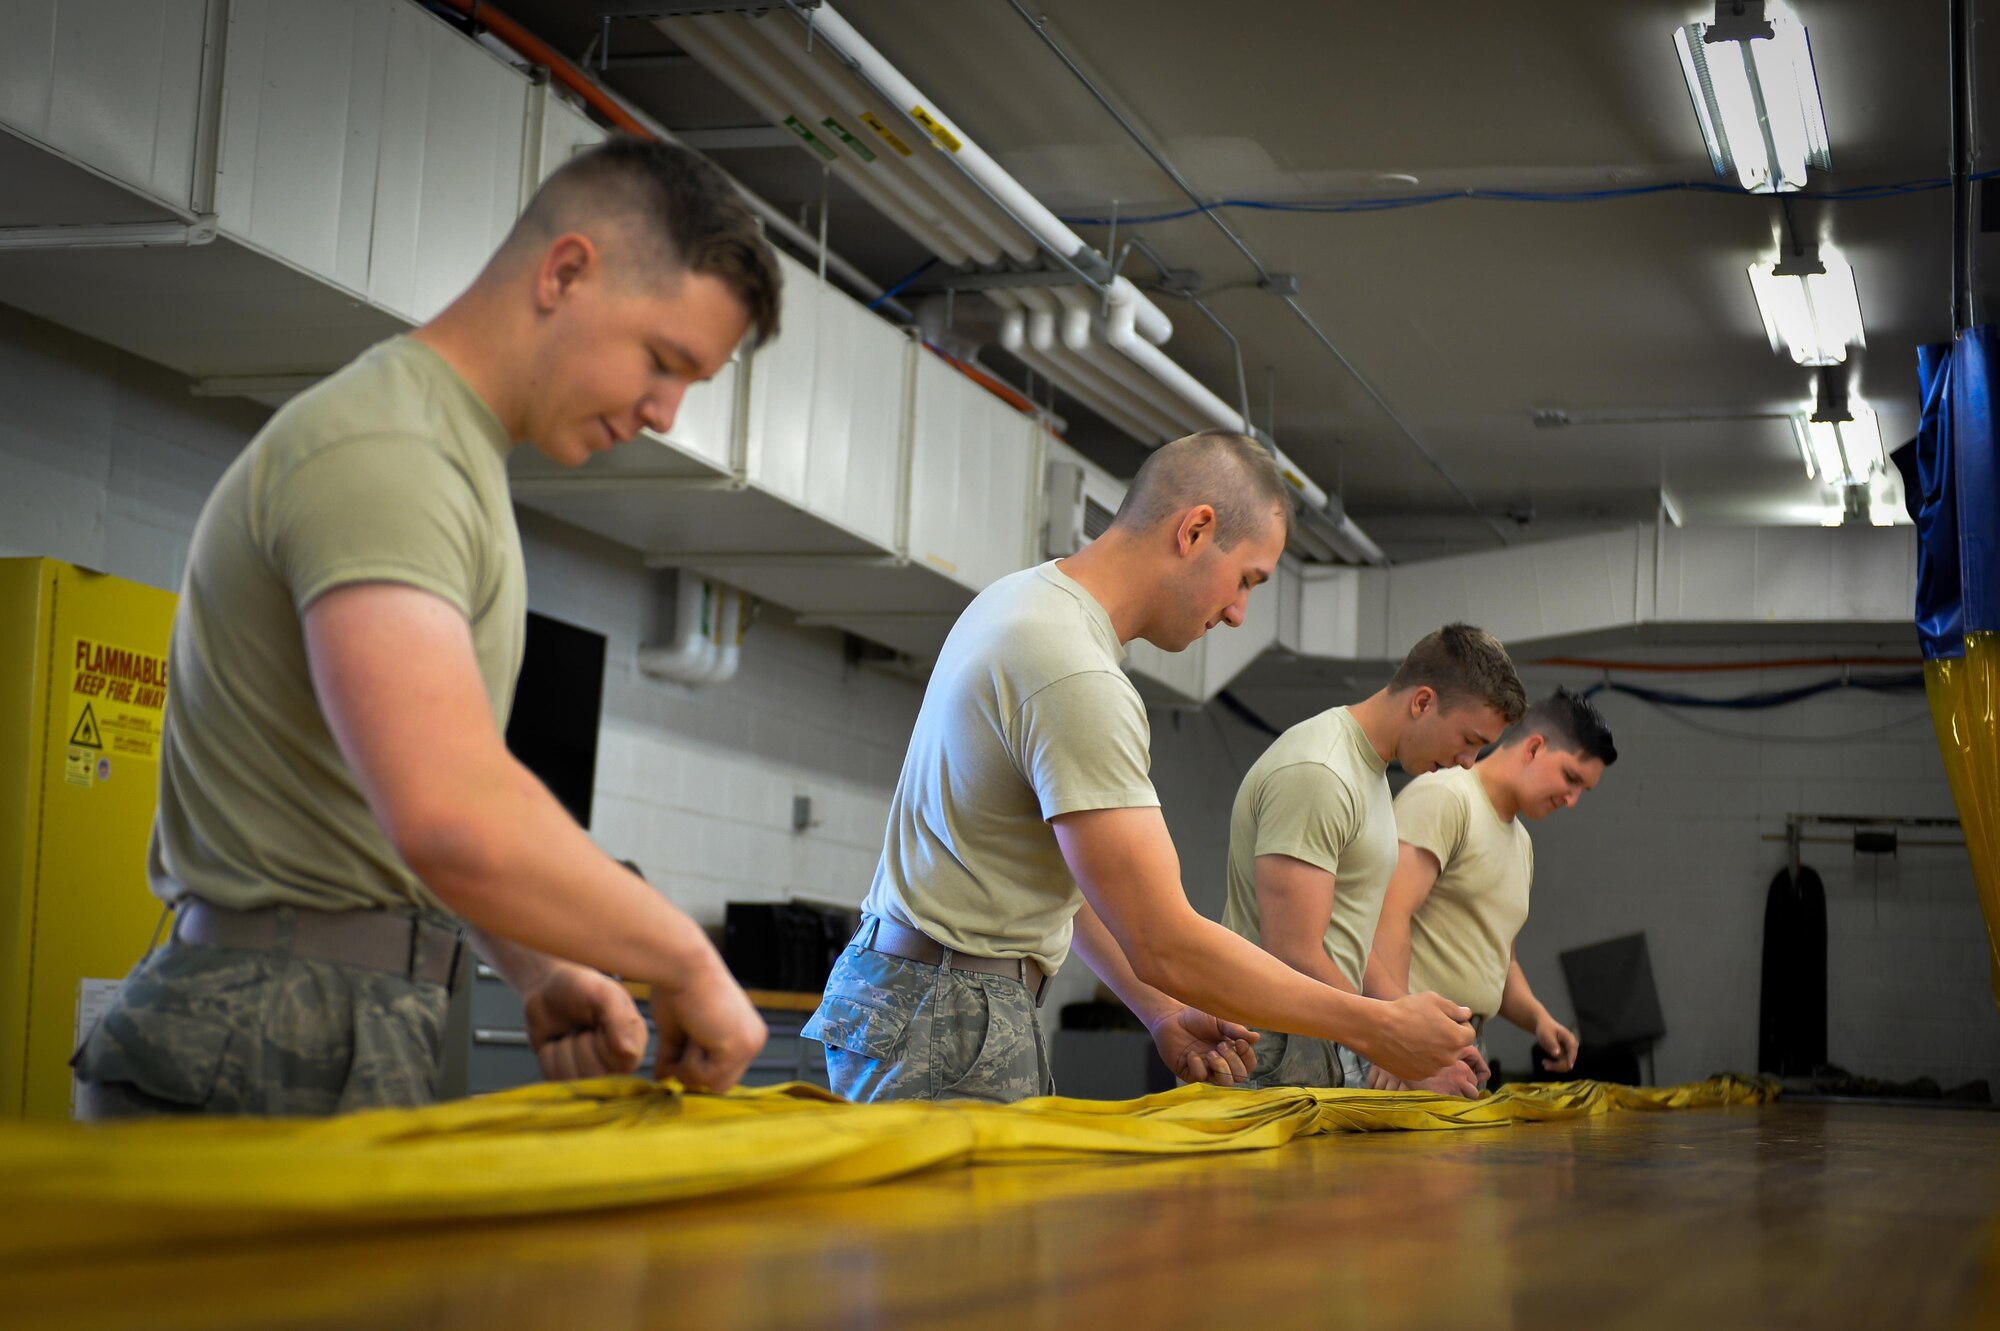 Airman with the 2nd Operations Support Squadron aircrew flight equipment parachute shop sort canopy lines at Barksdale Air Force Base, La., June 7, 2016. Lines were sorted to ensure correct canopy deployment during aircraft landing. The drag is held together by 48 lines that disperse tension between shoot and aircraft. (U.S. Air Force photo/Senior Airman Mozer O. Da Cunha)